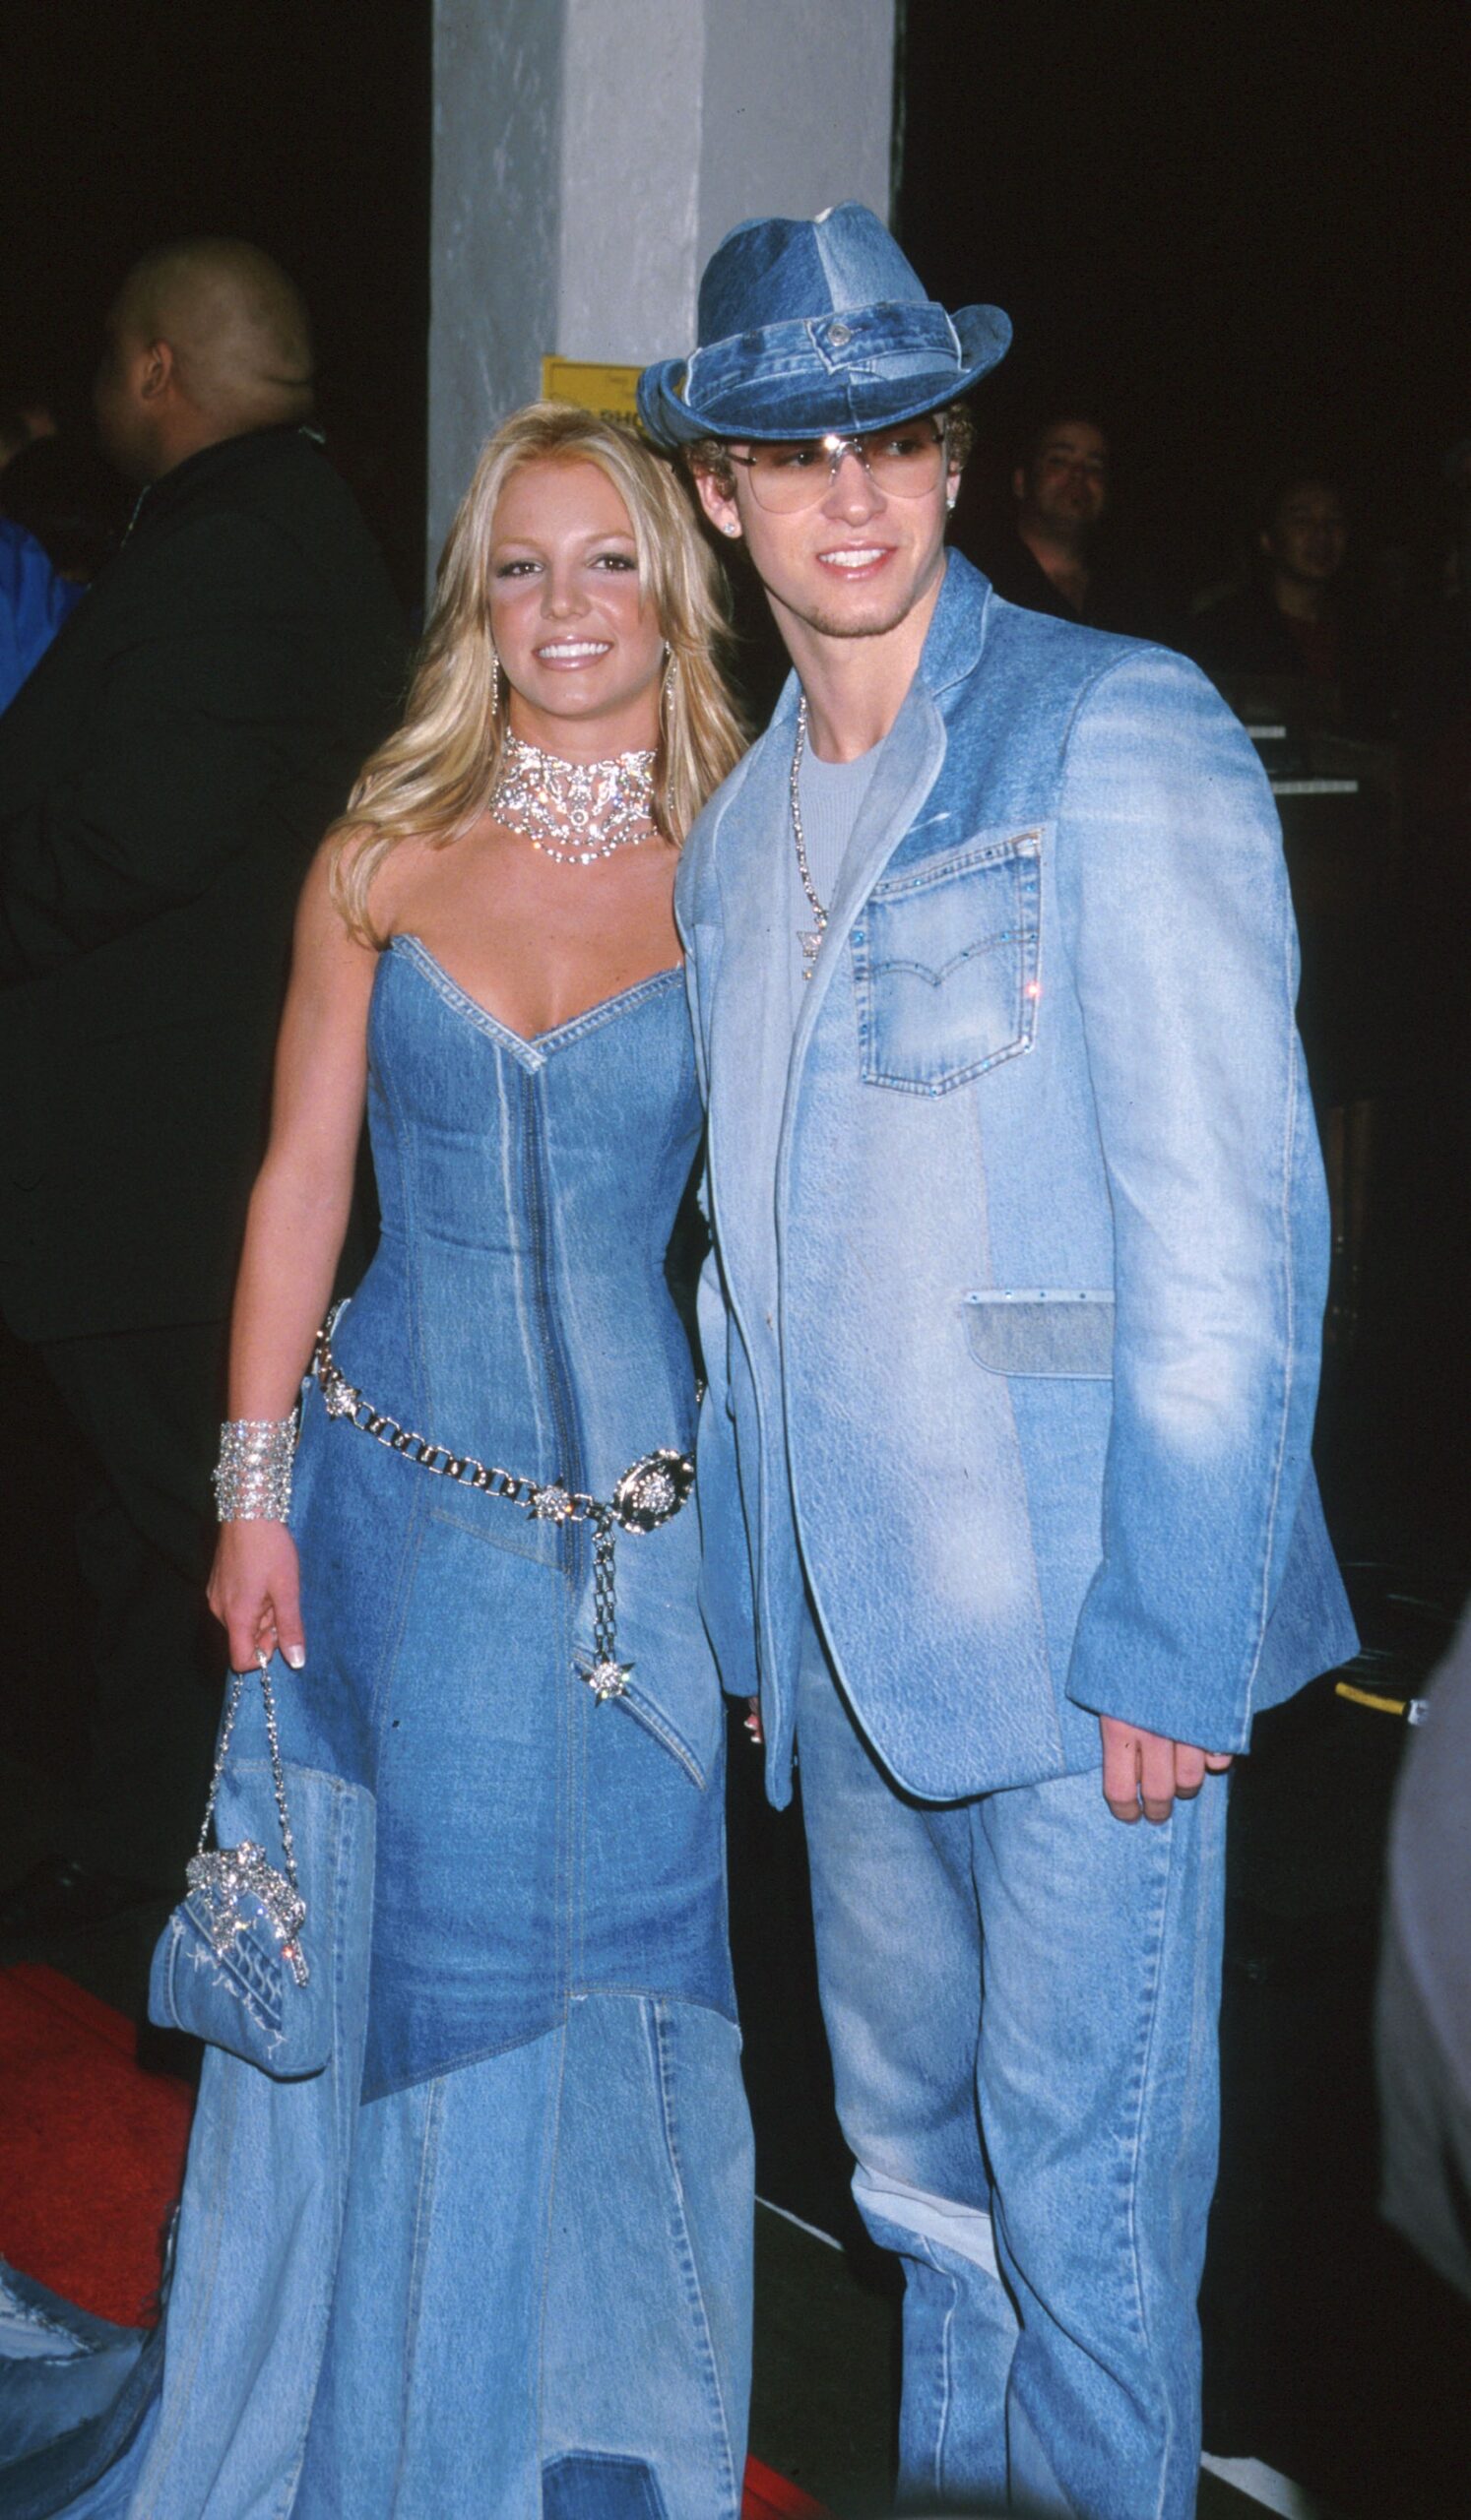 Britney Spears and Justin Timberlake attend the 2001 American Music Awards.